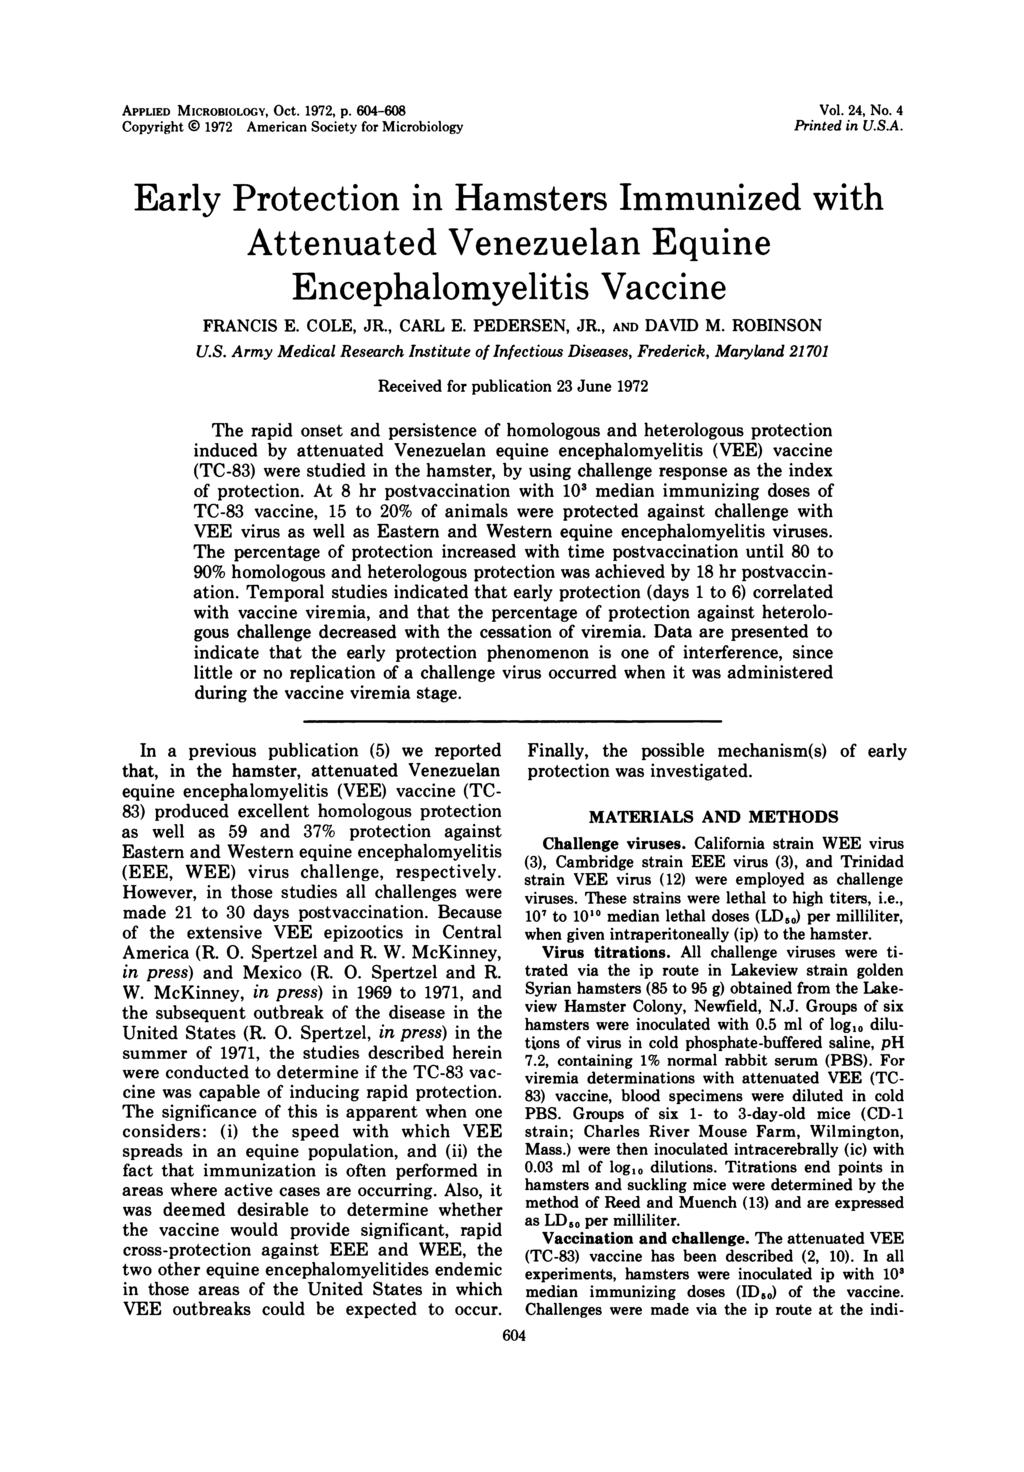 APPLIED MICROBIOLOGY, Oct. 1972, p. 604-608 Copyright 0 1972 Americn Society for Microbiology Vol. 24, No. 4 Printed in U.S.A. Erly Protection in Hmsters Immunized with Attenuted Venezueln Equine Encephlomyelitis Vccine FRANCIS E.